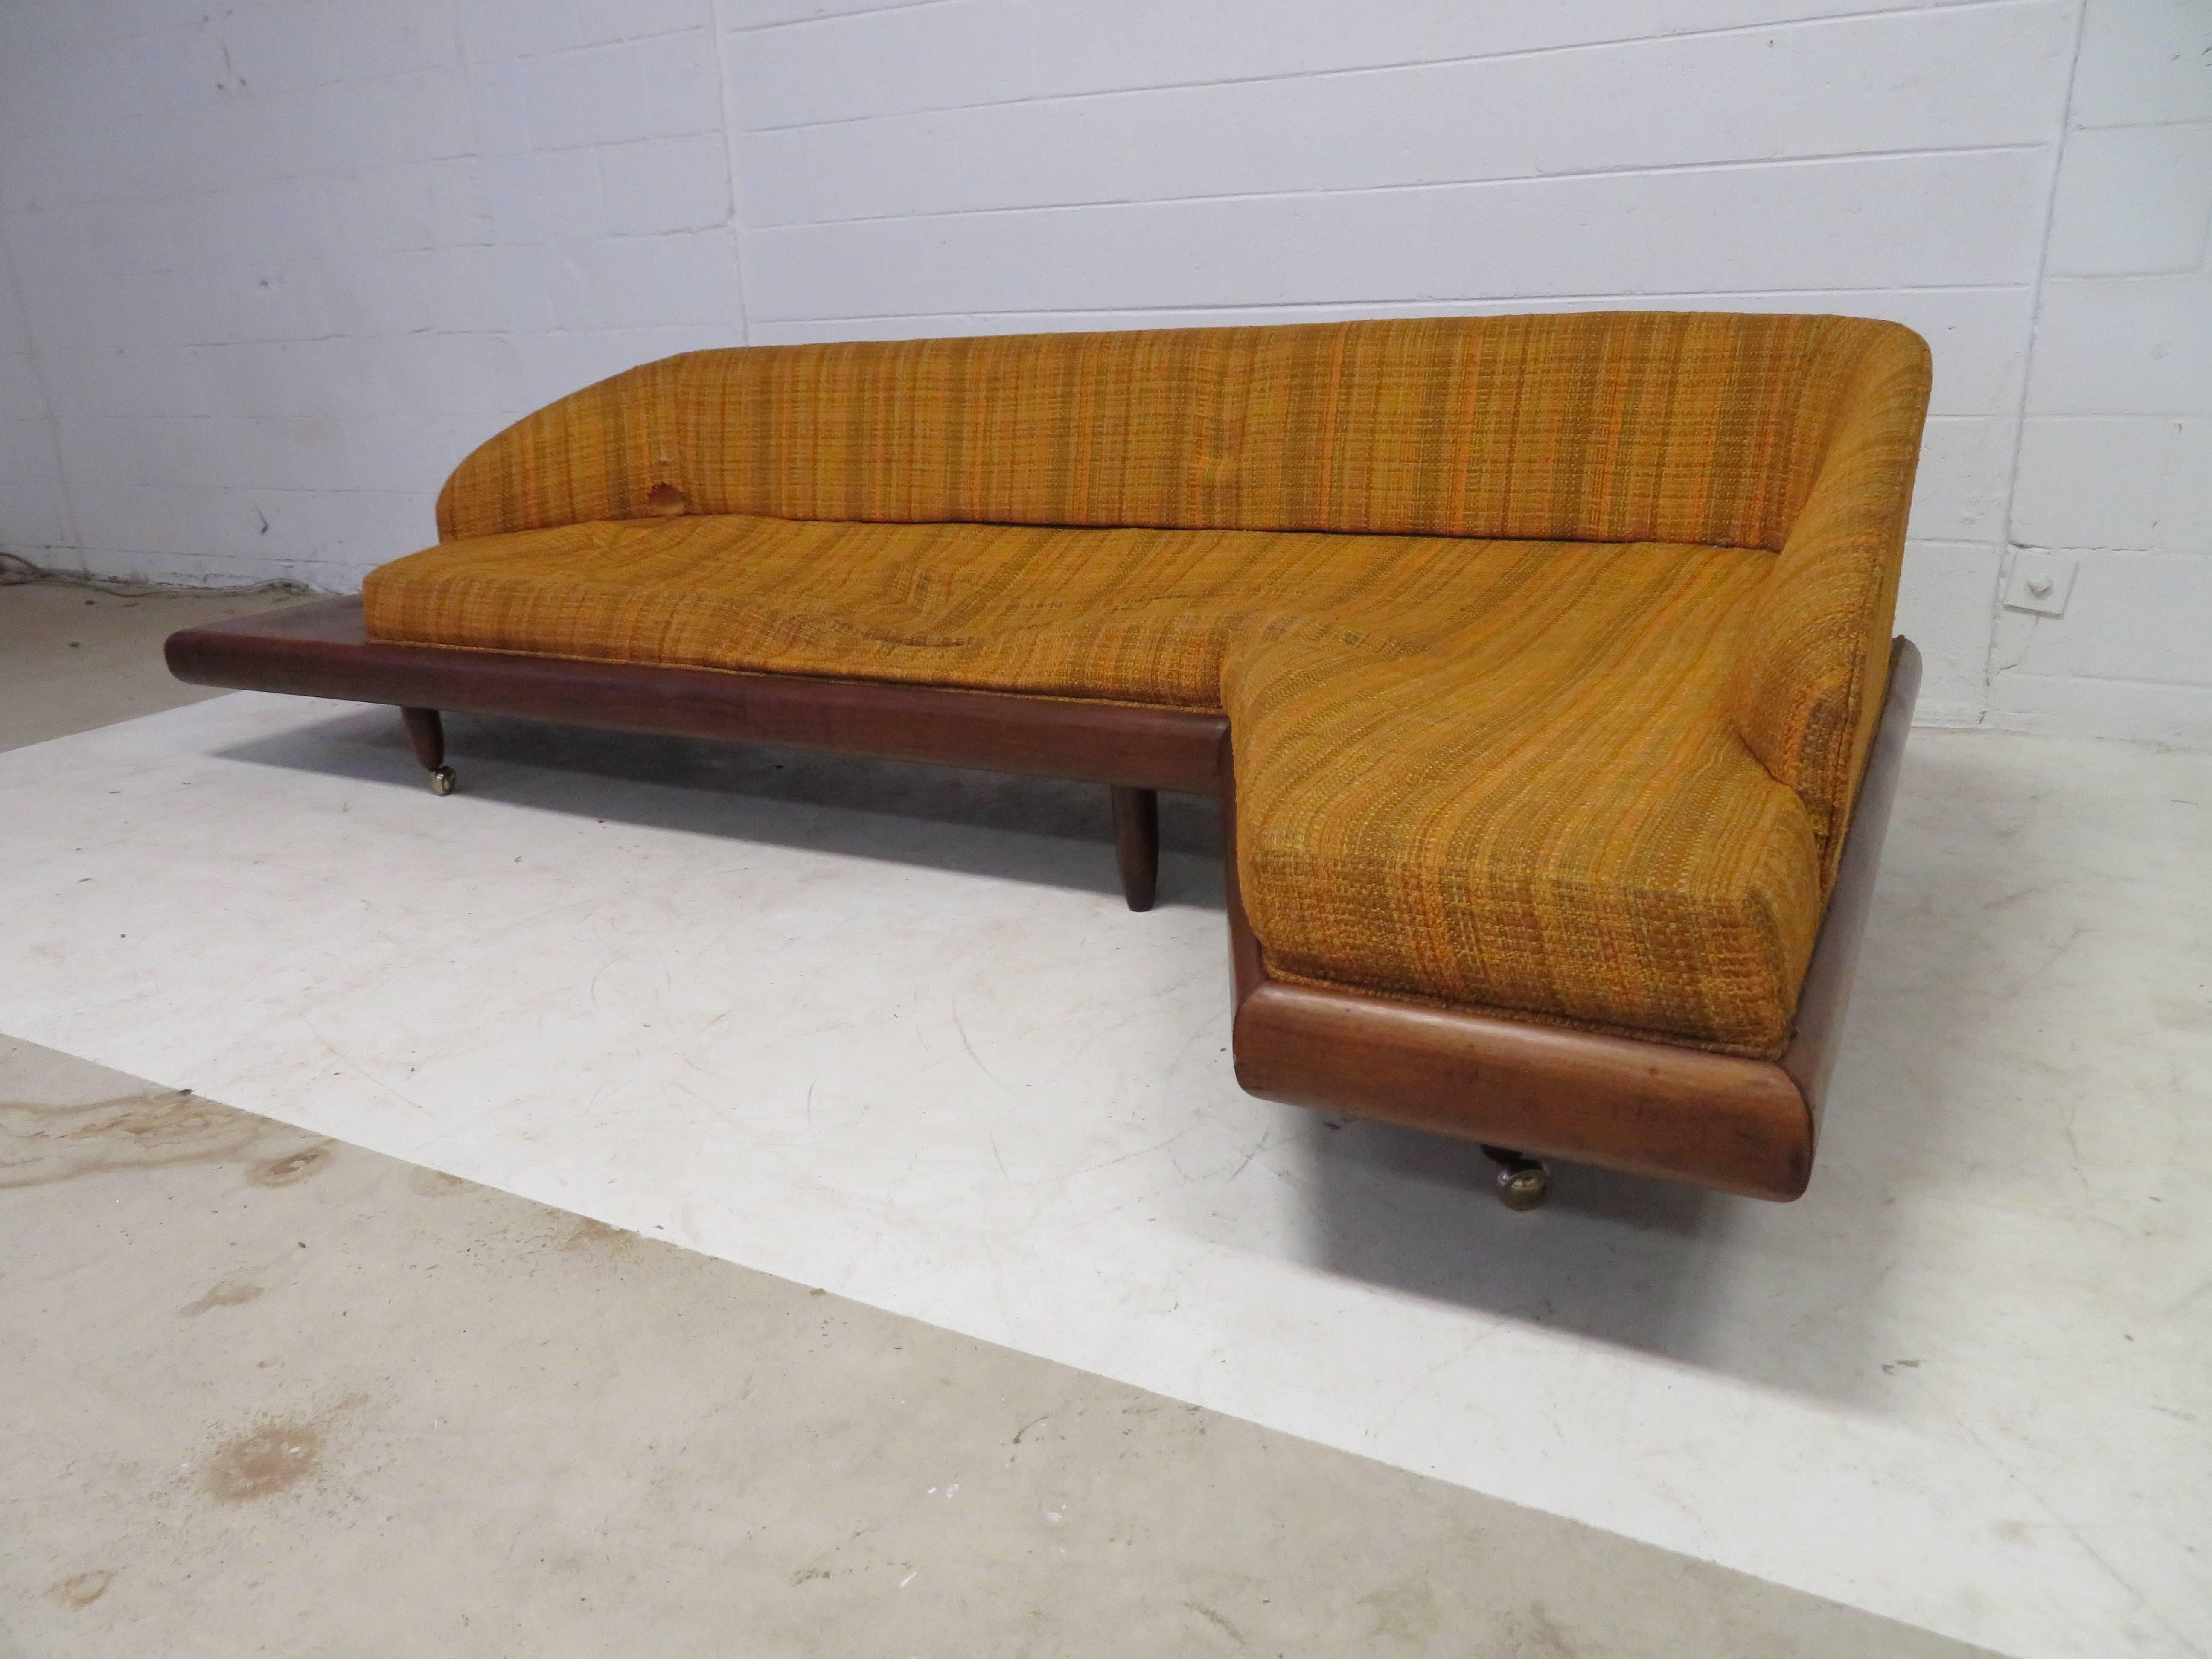 Very unusual Adrian Pearsall sculptural walnut boomerang sofa with attached side table. Of-course this will need to be re-upholstered but this is the perfect high style sofa to do! We love the small attached side table on one side and tiny finished